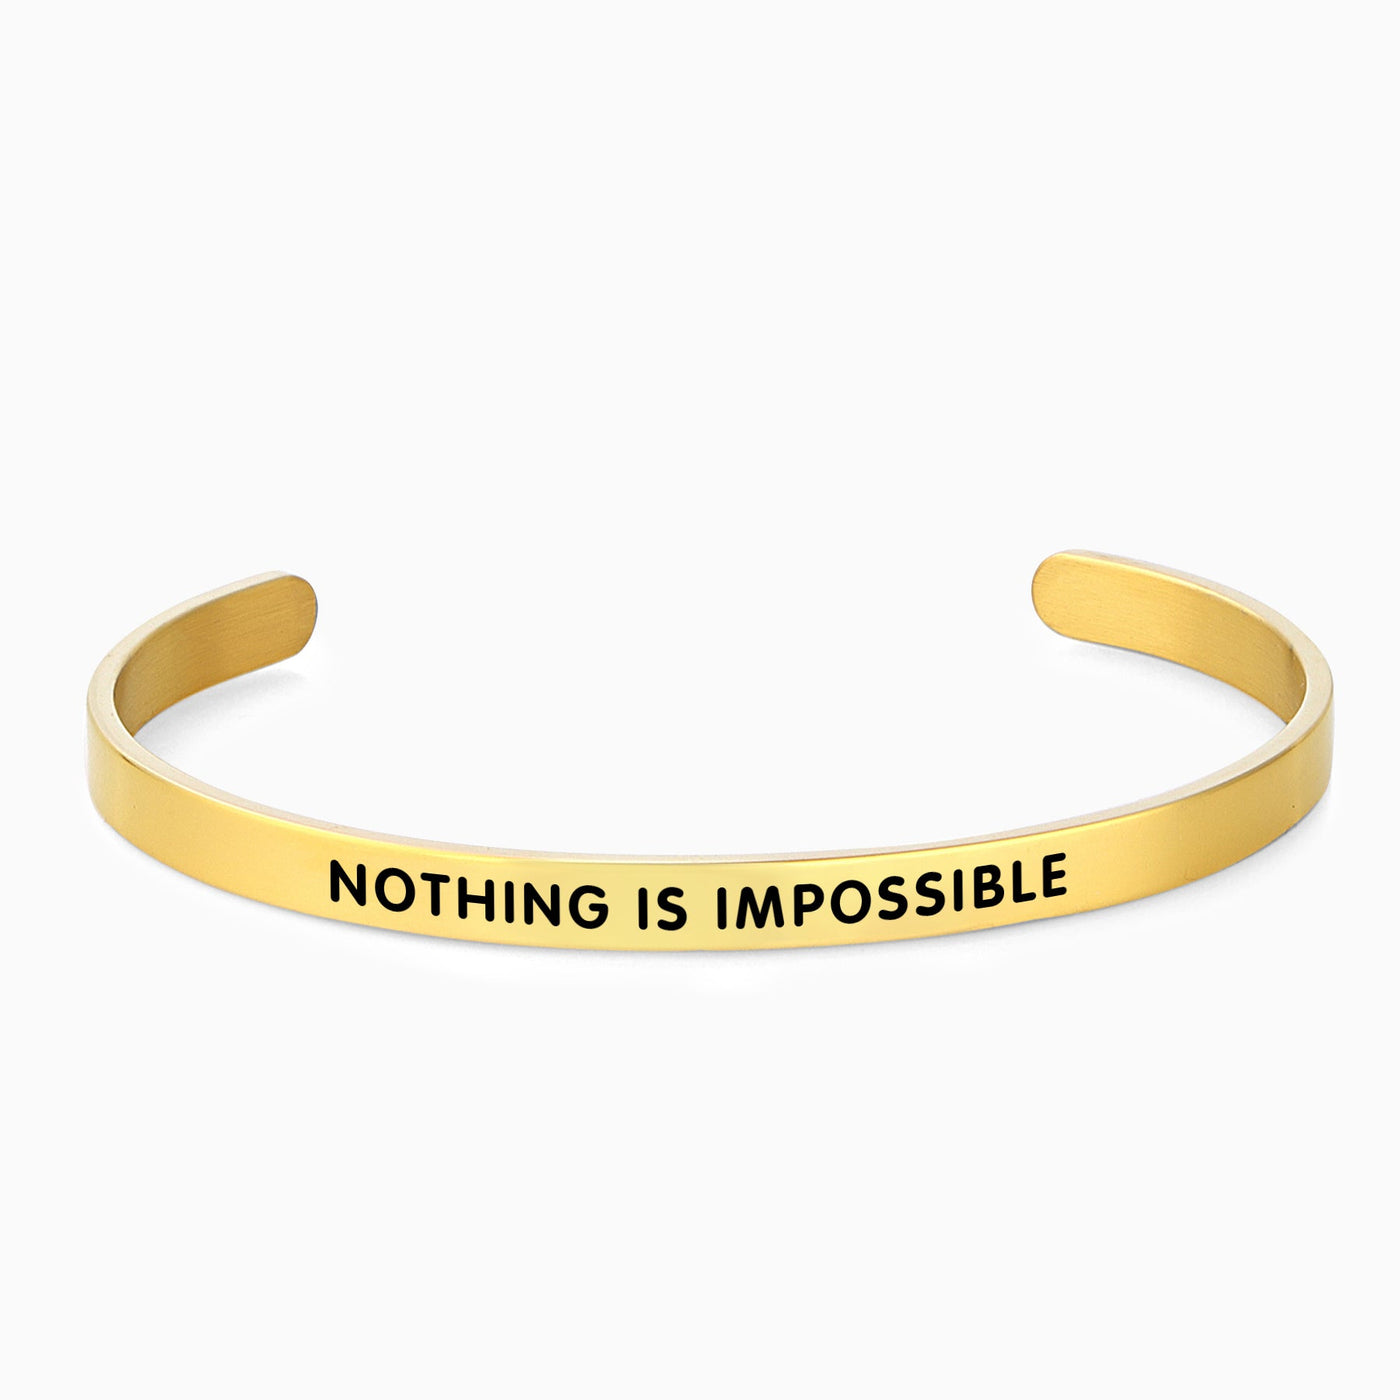 NOTHING IS IMPOSSIBLE - OTANTO